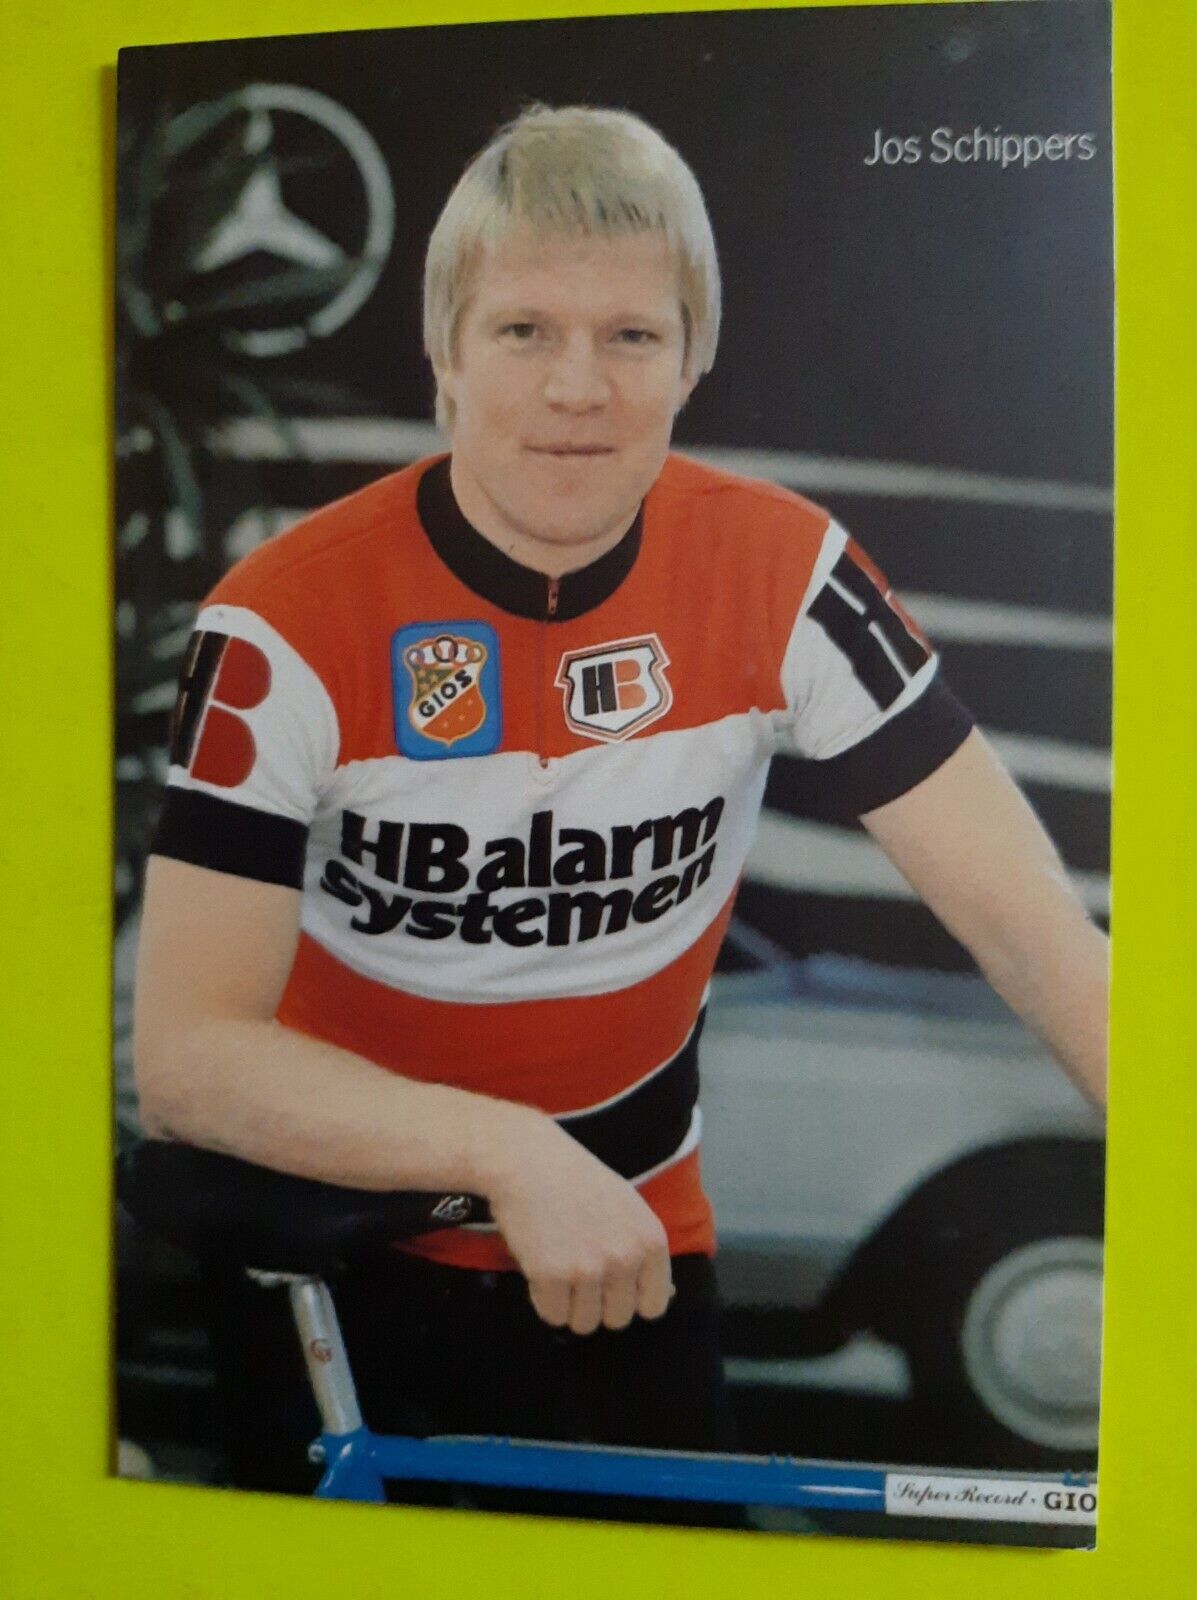 CYCLING cycling card JOS SCHIPPERS team HB ALARM SYSTEMS 1979